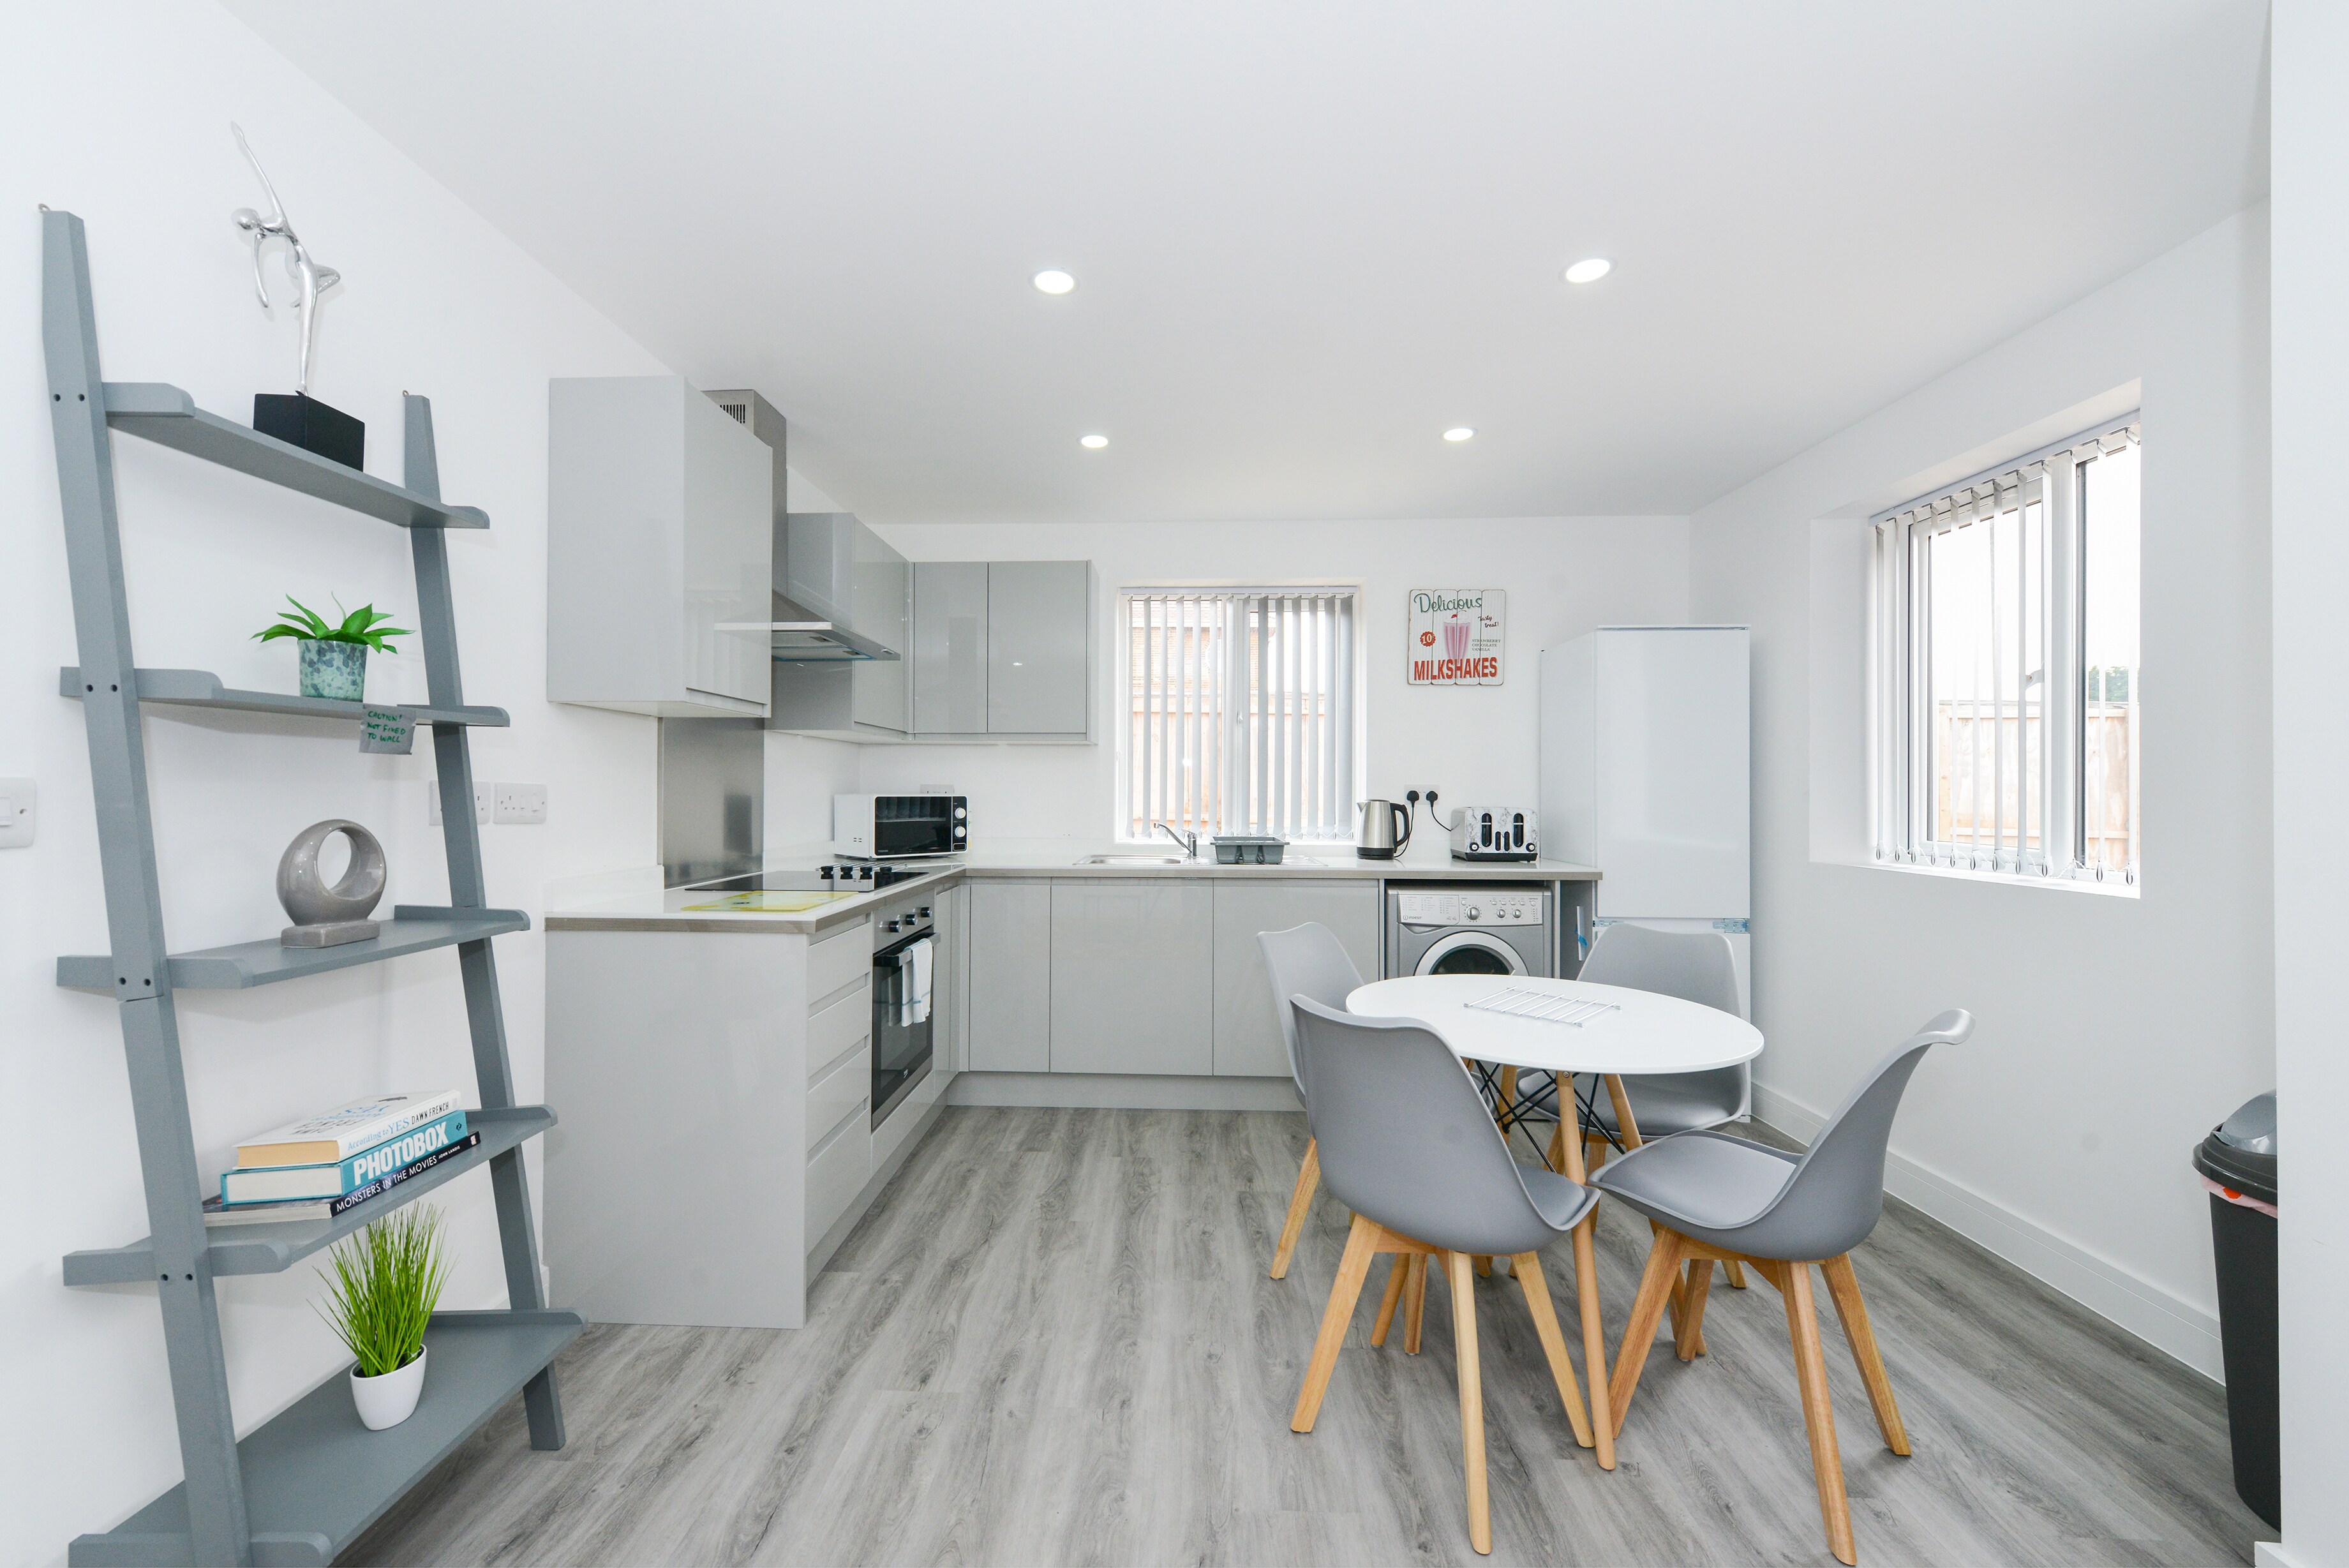 Property Image 2 - Sleek and Stylish 2bed Home, Low Carbon, Parking